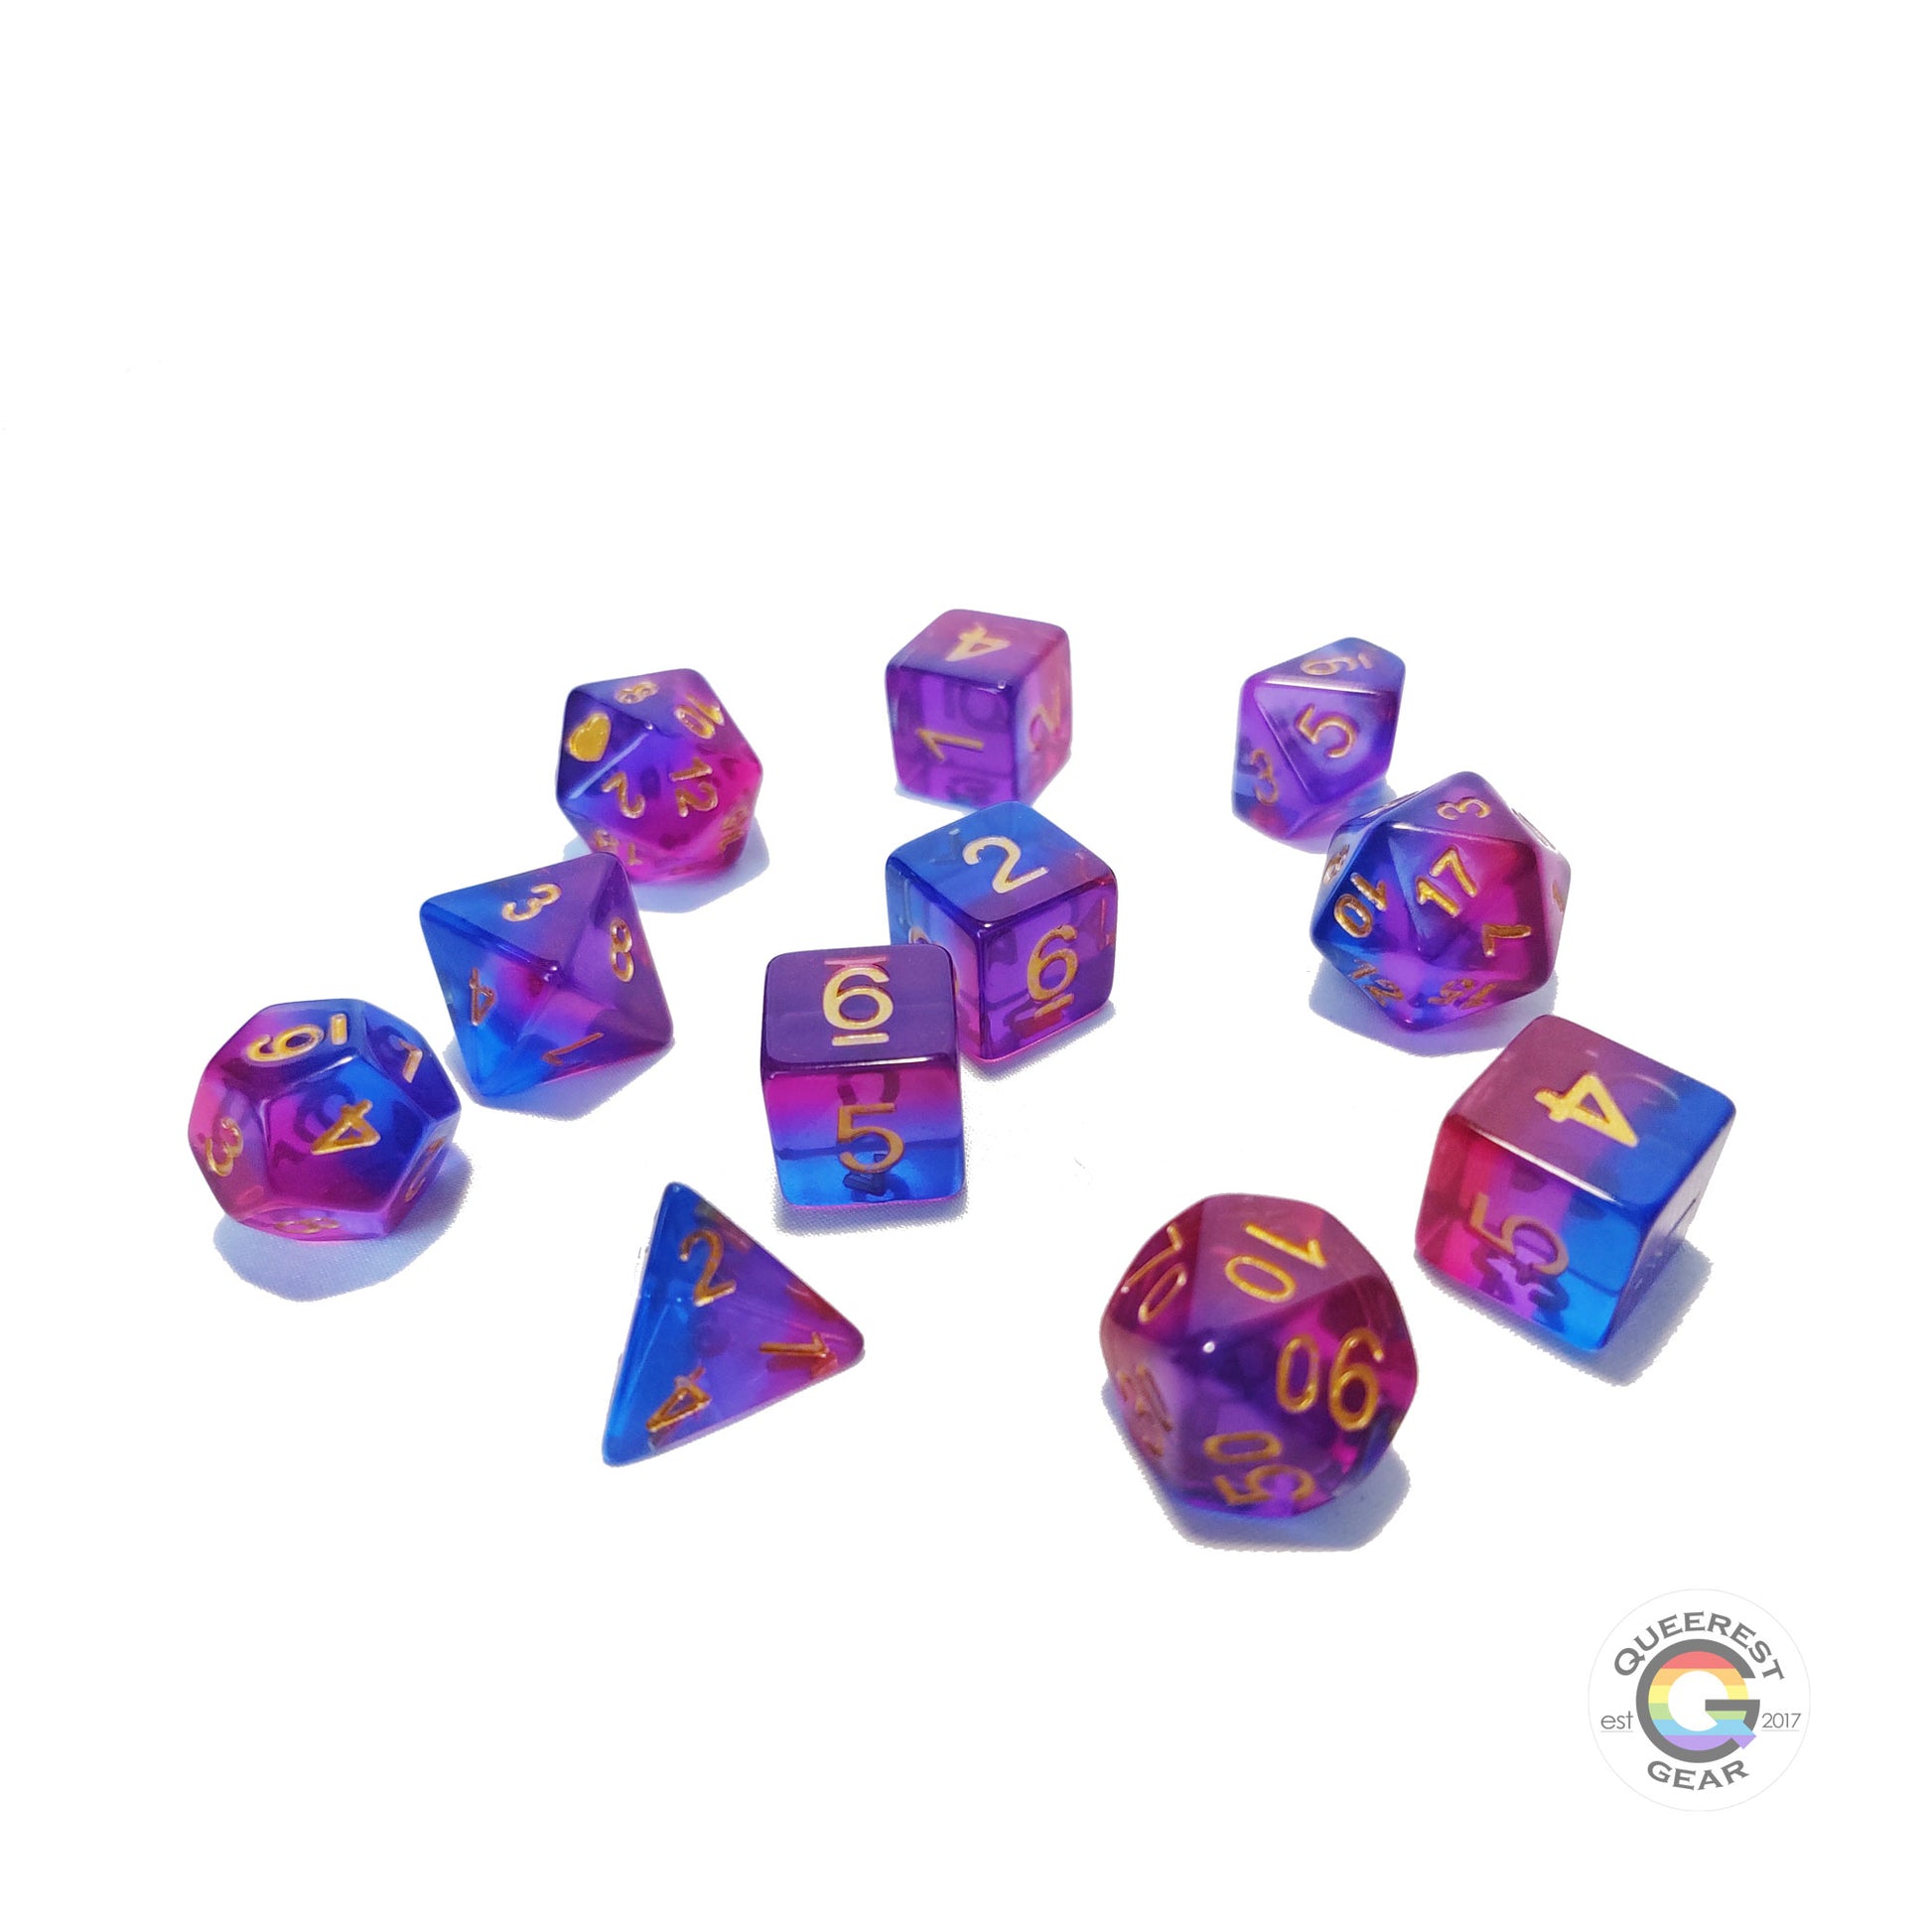 11 piece set of polyhedral dice scattered on a white background. They are transparent and colored in the stripes of the bisexual flag with gold ink.